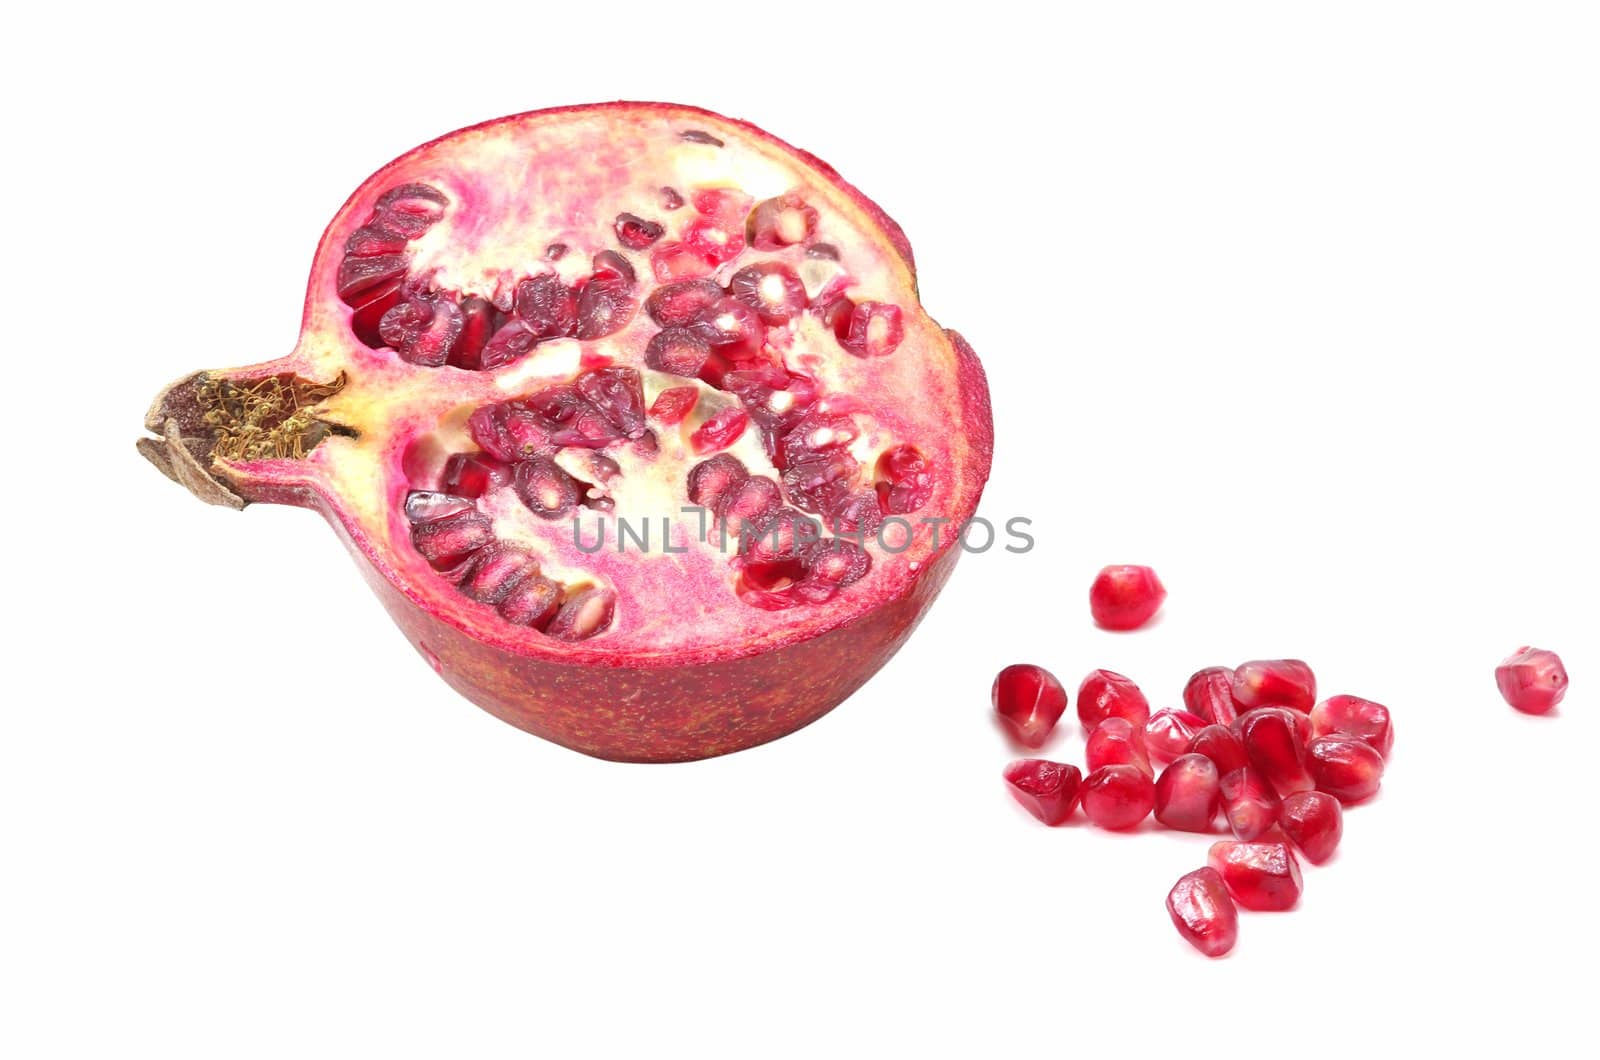 Cutted pomegranate with seeds